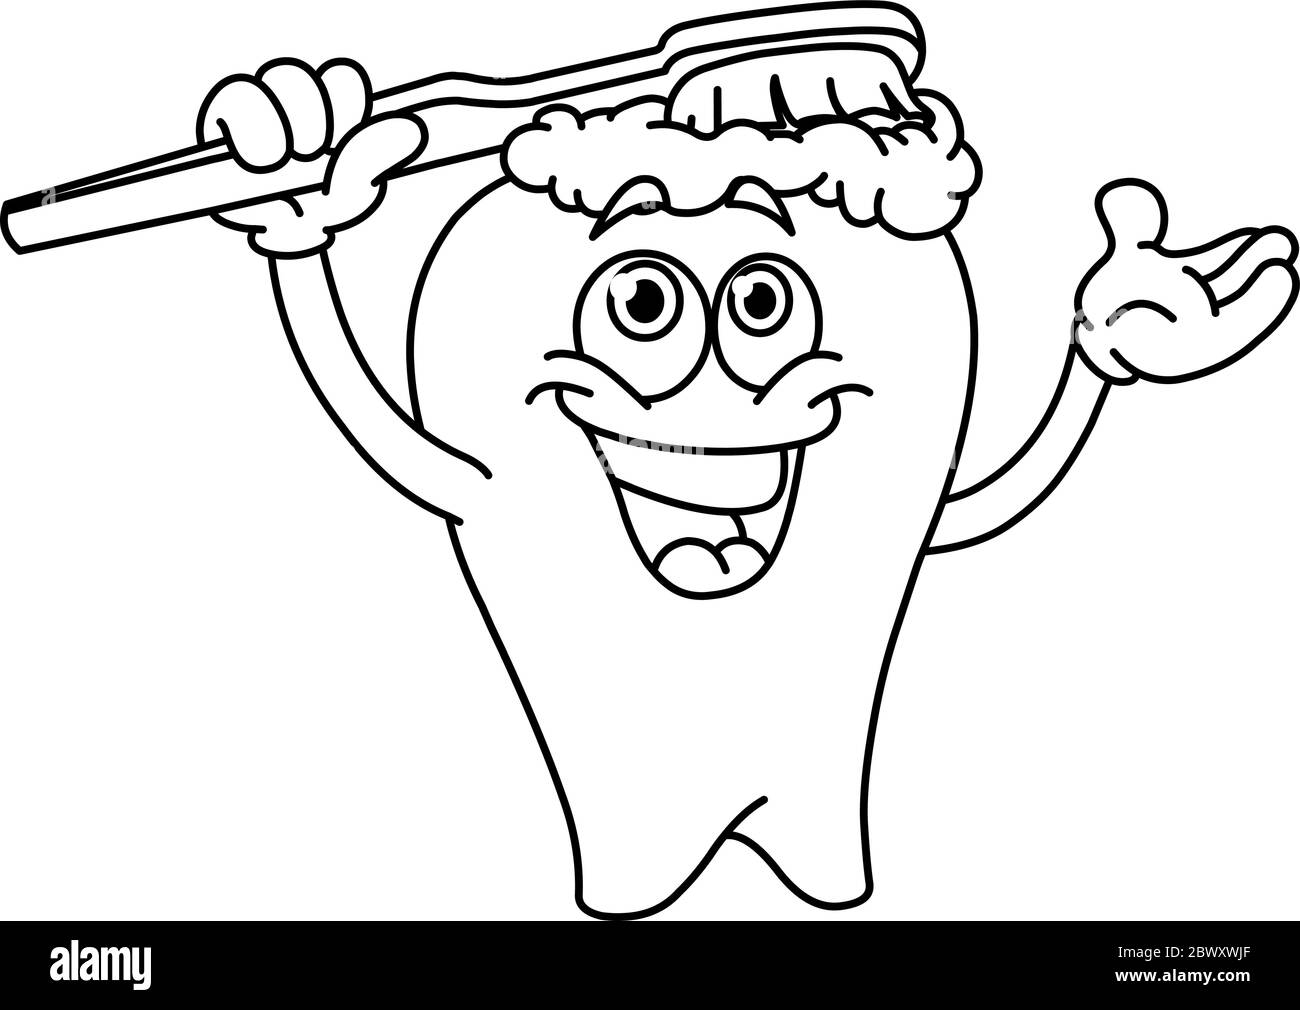 Outlined cartoon tooth brushing itself. Vector line art illustration coloring page. Stock Vector